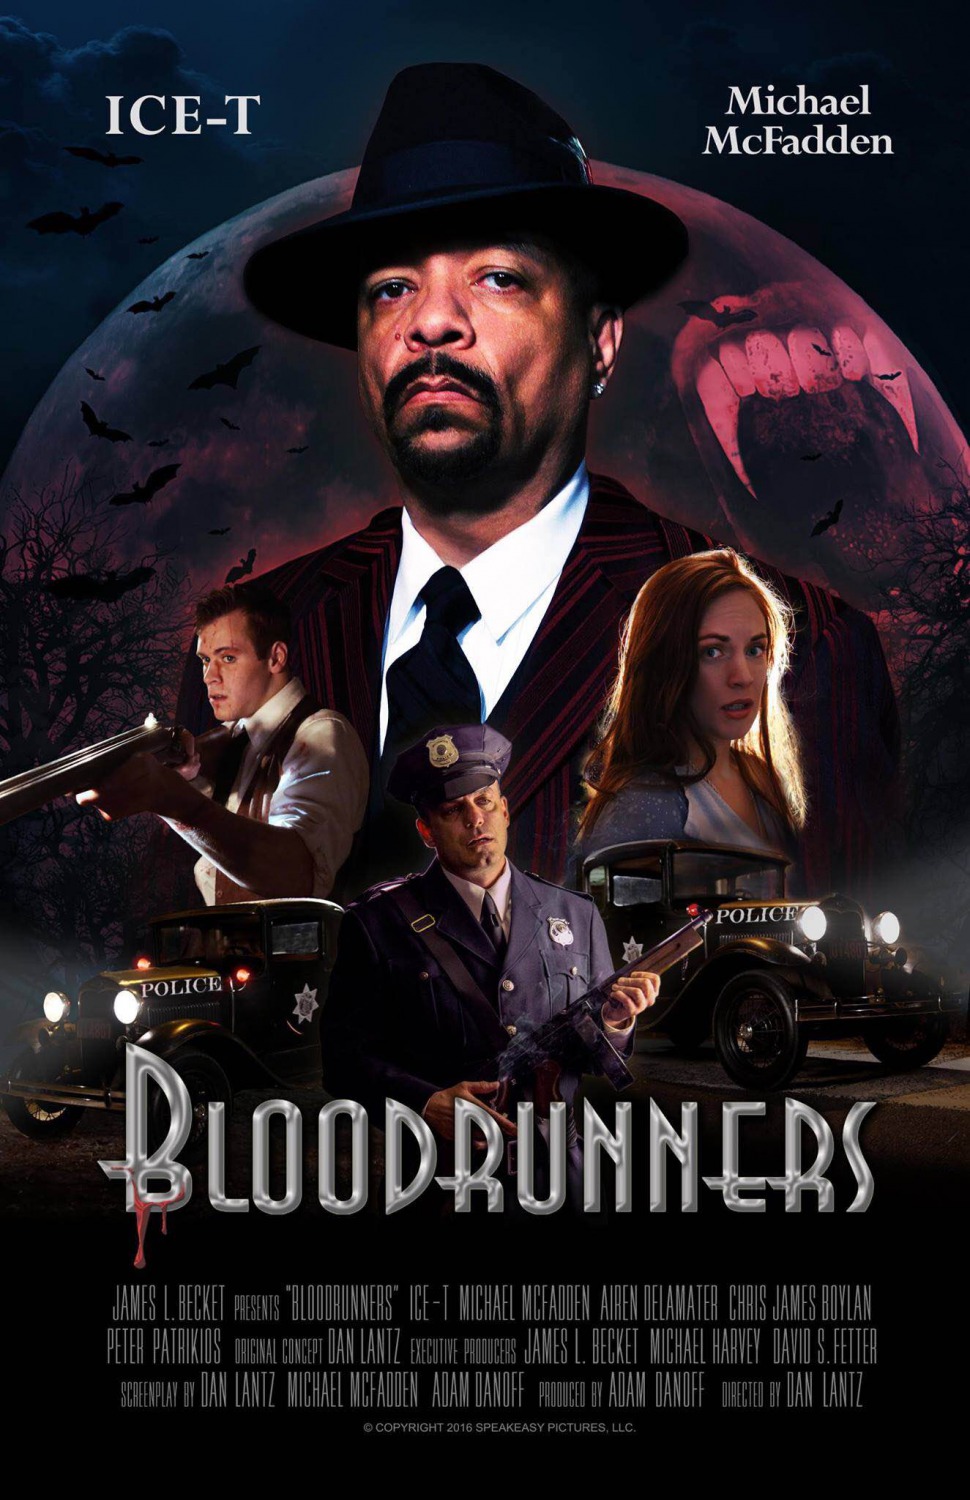 Extra Large Movie Poster Image for Bloodrunners 